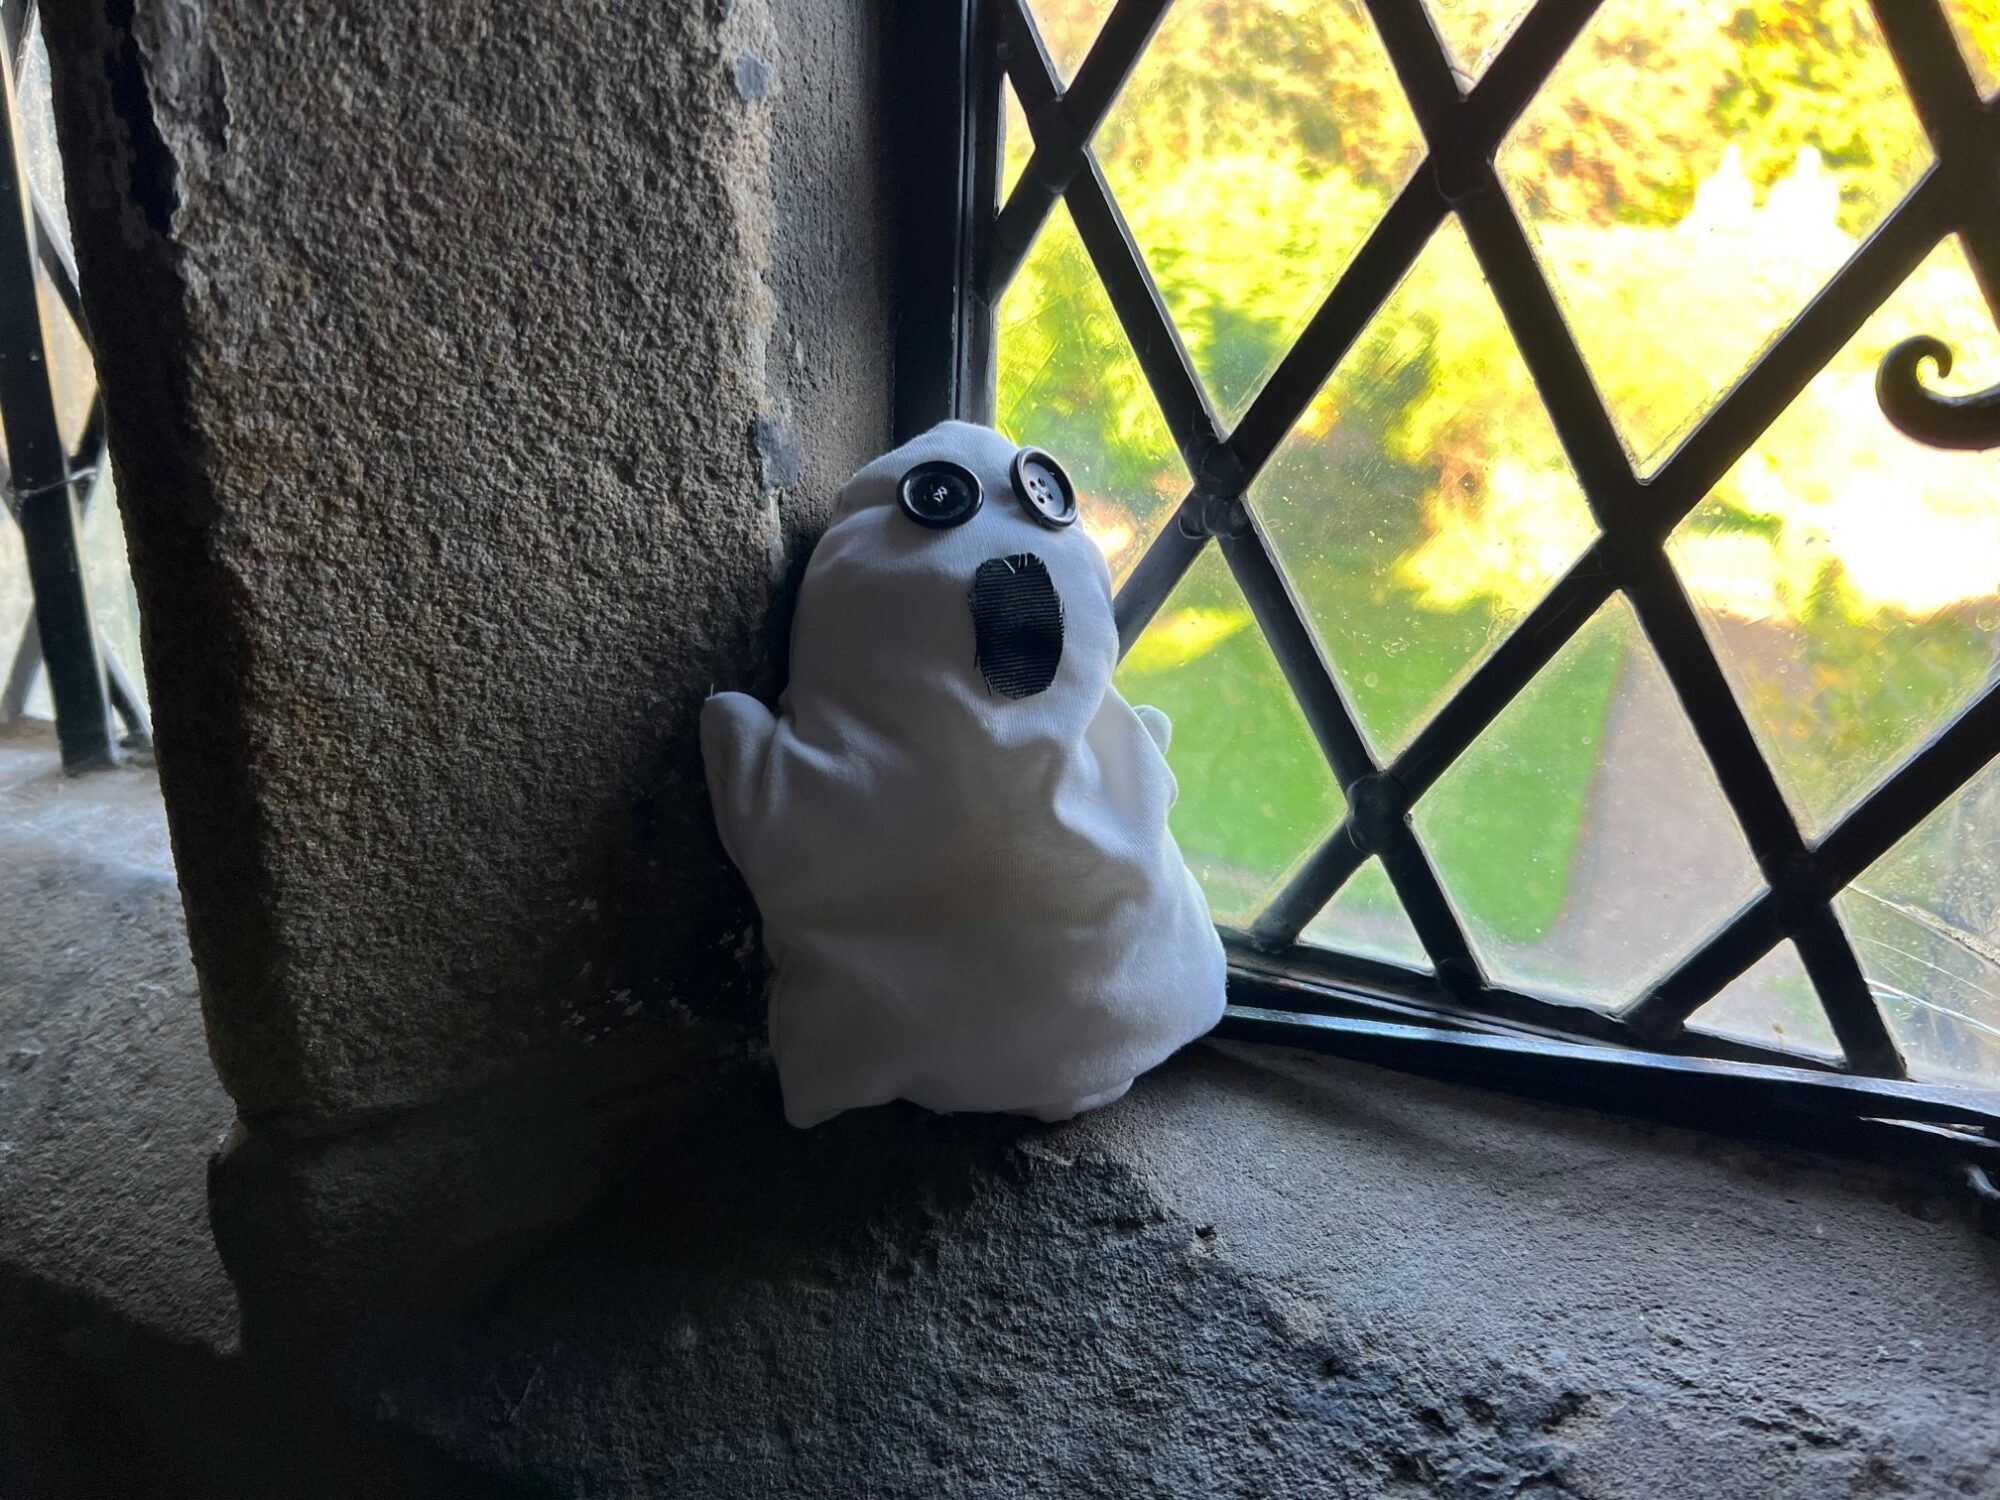 Image name ghost east riddlesden hall halloween 2022 the 6 image from the post Halloween in Yorkshire 2022 in Yorkshire.com.